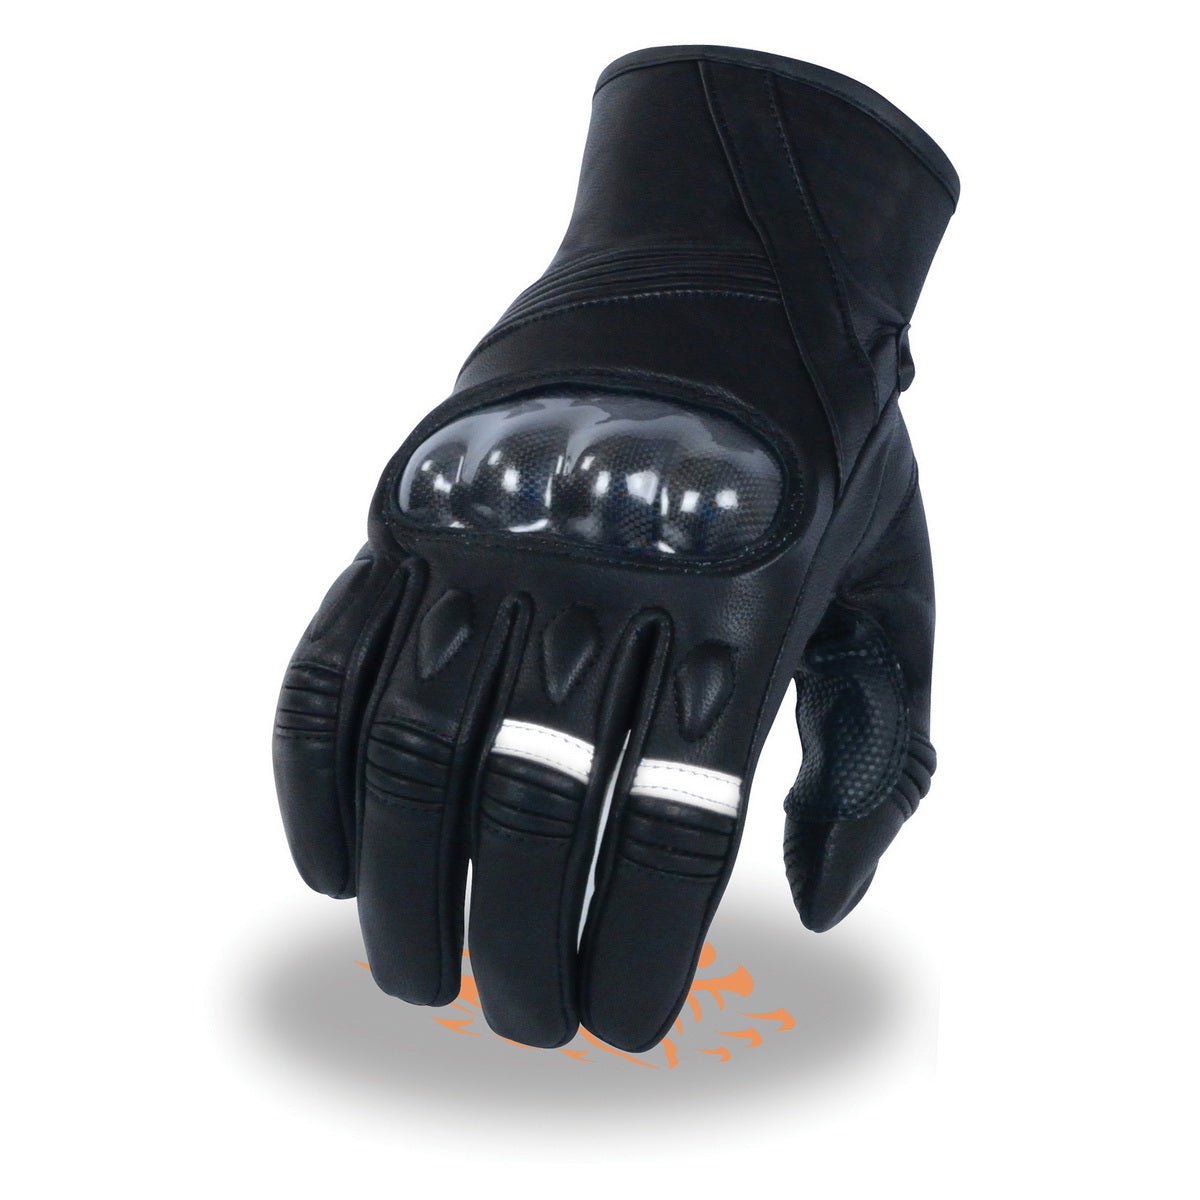 Milwaukee Leather MG7540 Men's Black Leather Protective Knuckle Racer Motorcycle Gloves W/ Elasticized Reflective Fingers